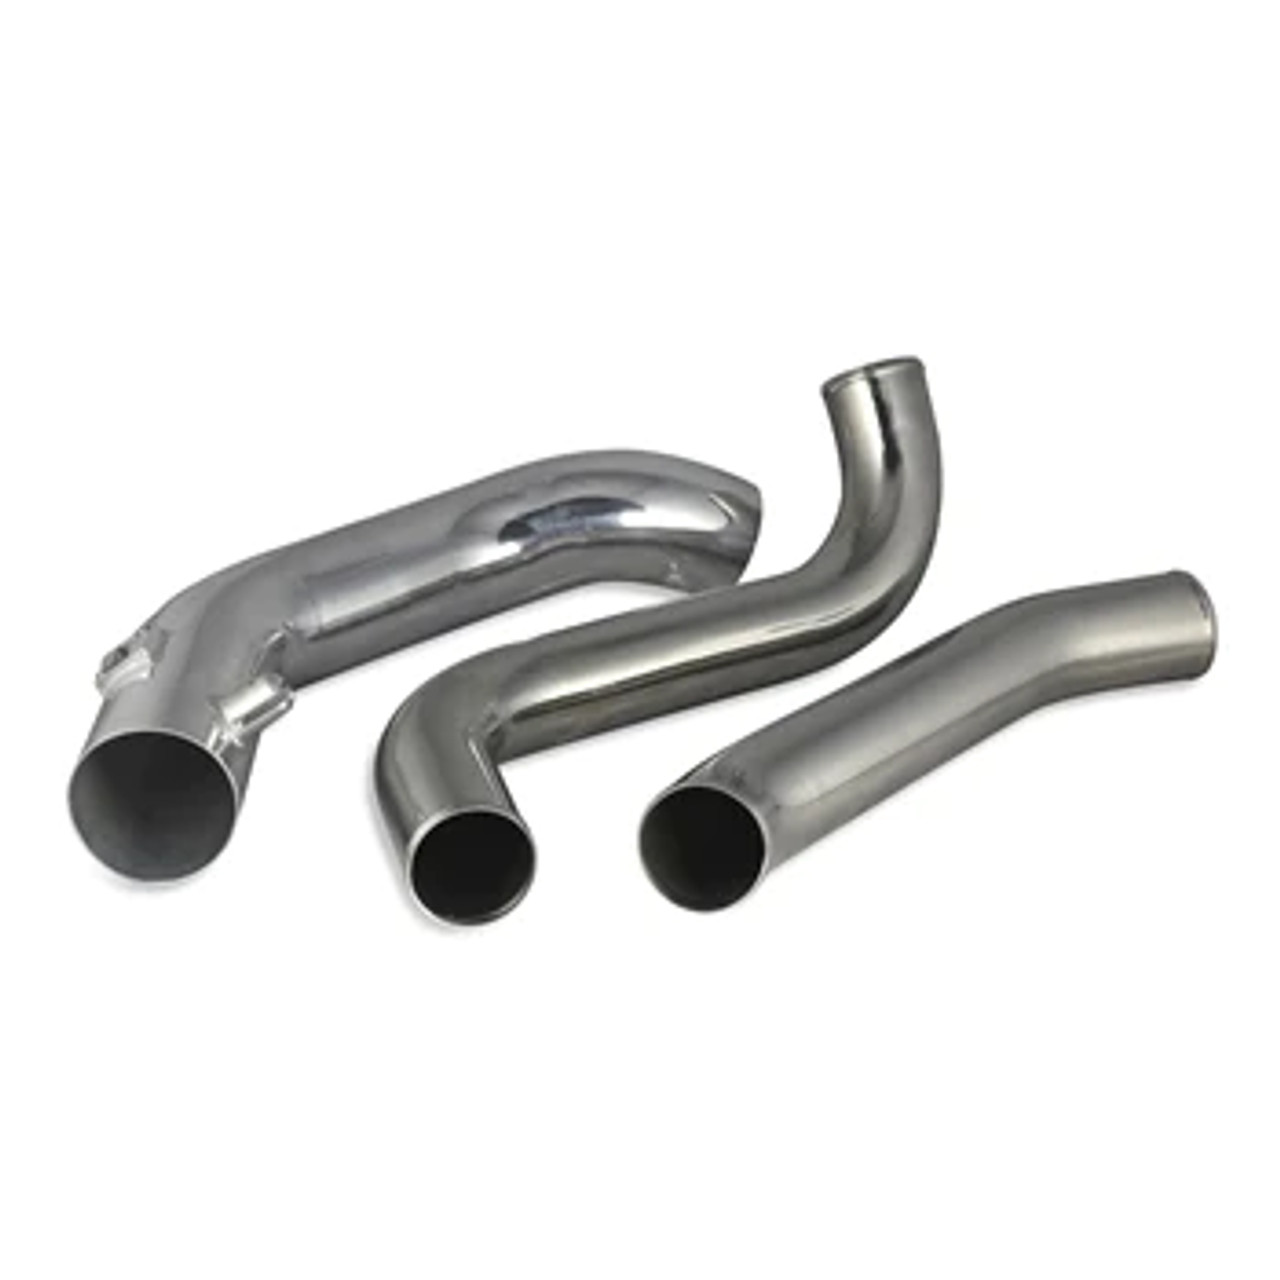 Smeding Diesel Complete Intercooler Pipe Kit For 2015 to 2016 Ford 6.7L Powerstroke (SD_67_1516PK) Piping View